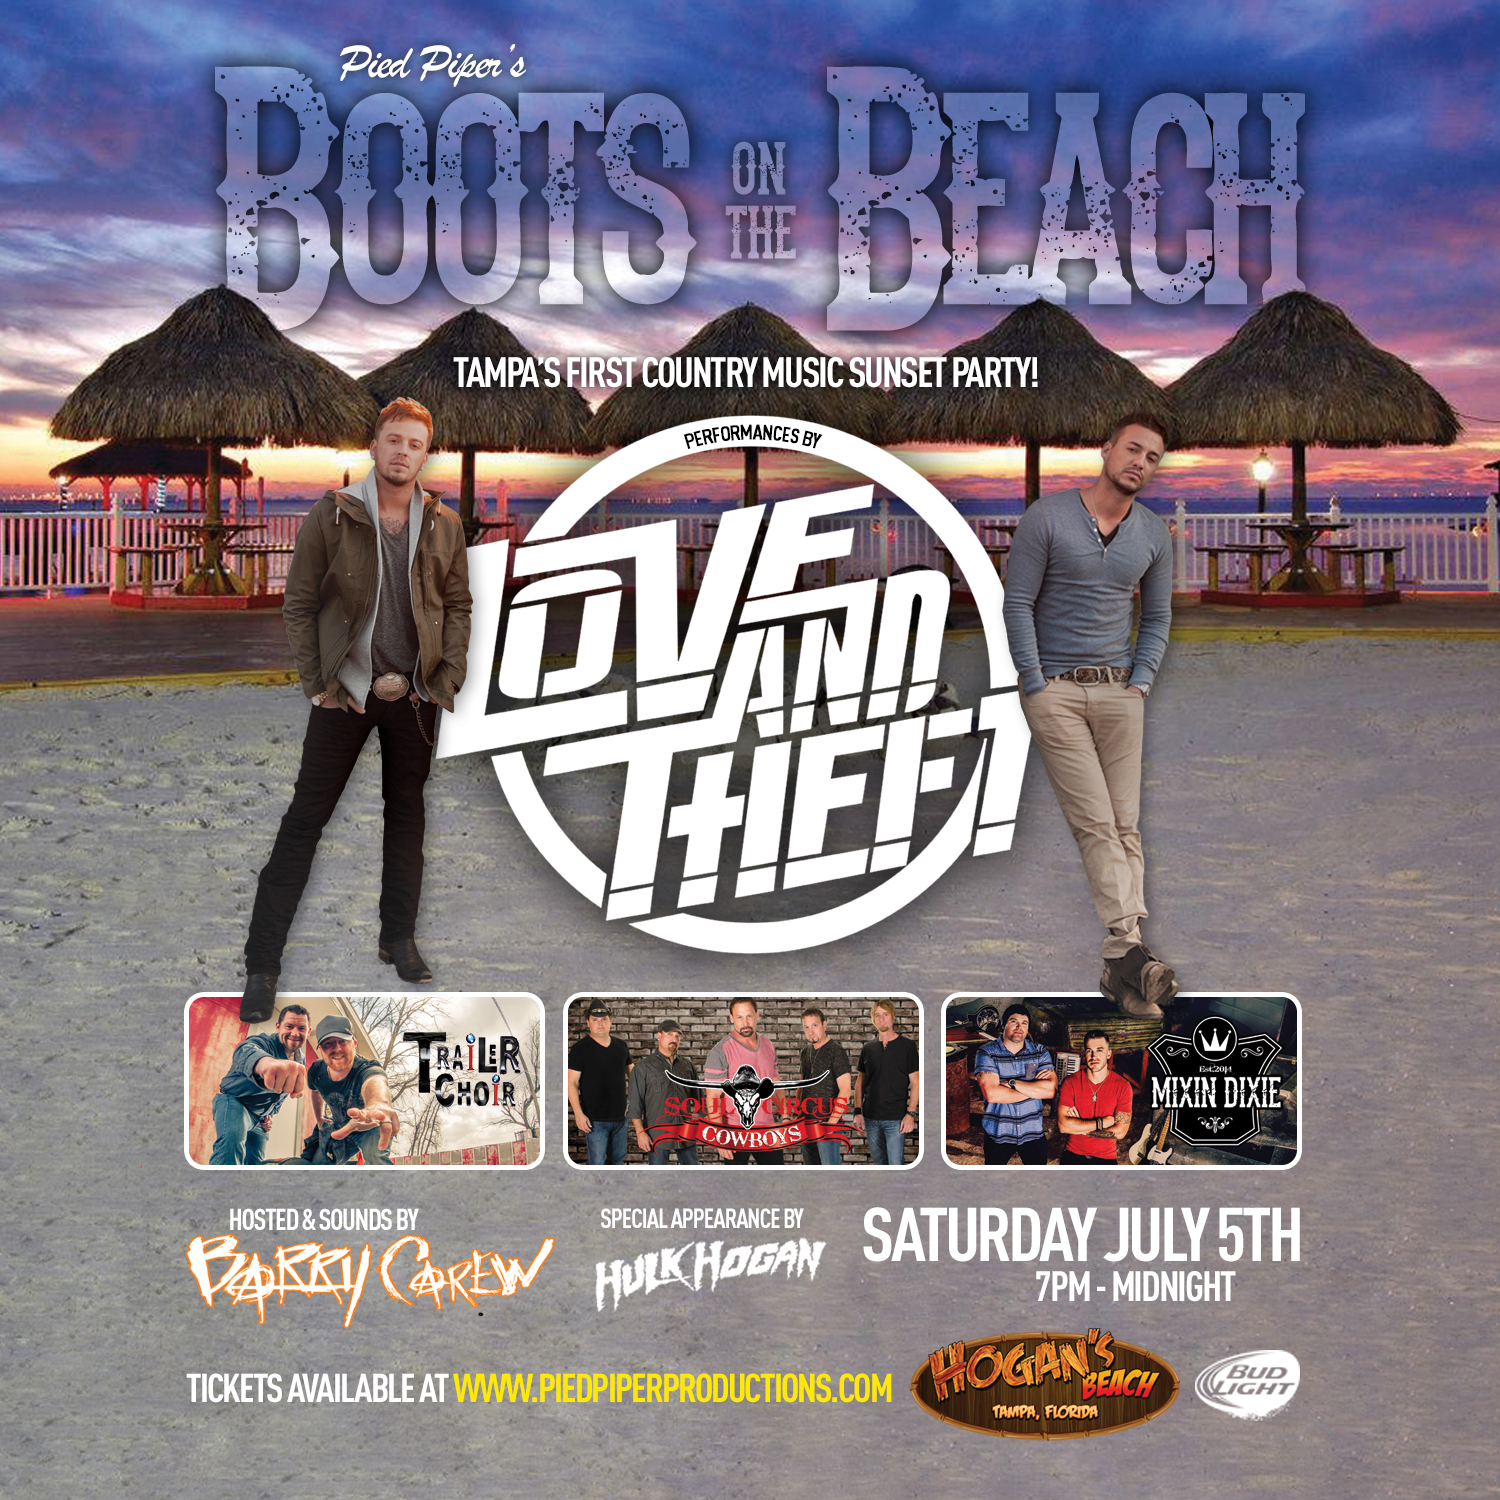 Love and Theft to Headline Boots on the Beach in Tampa this Saturday